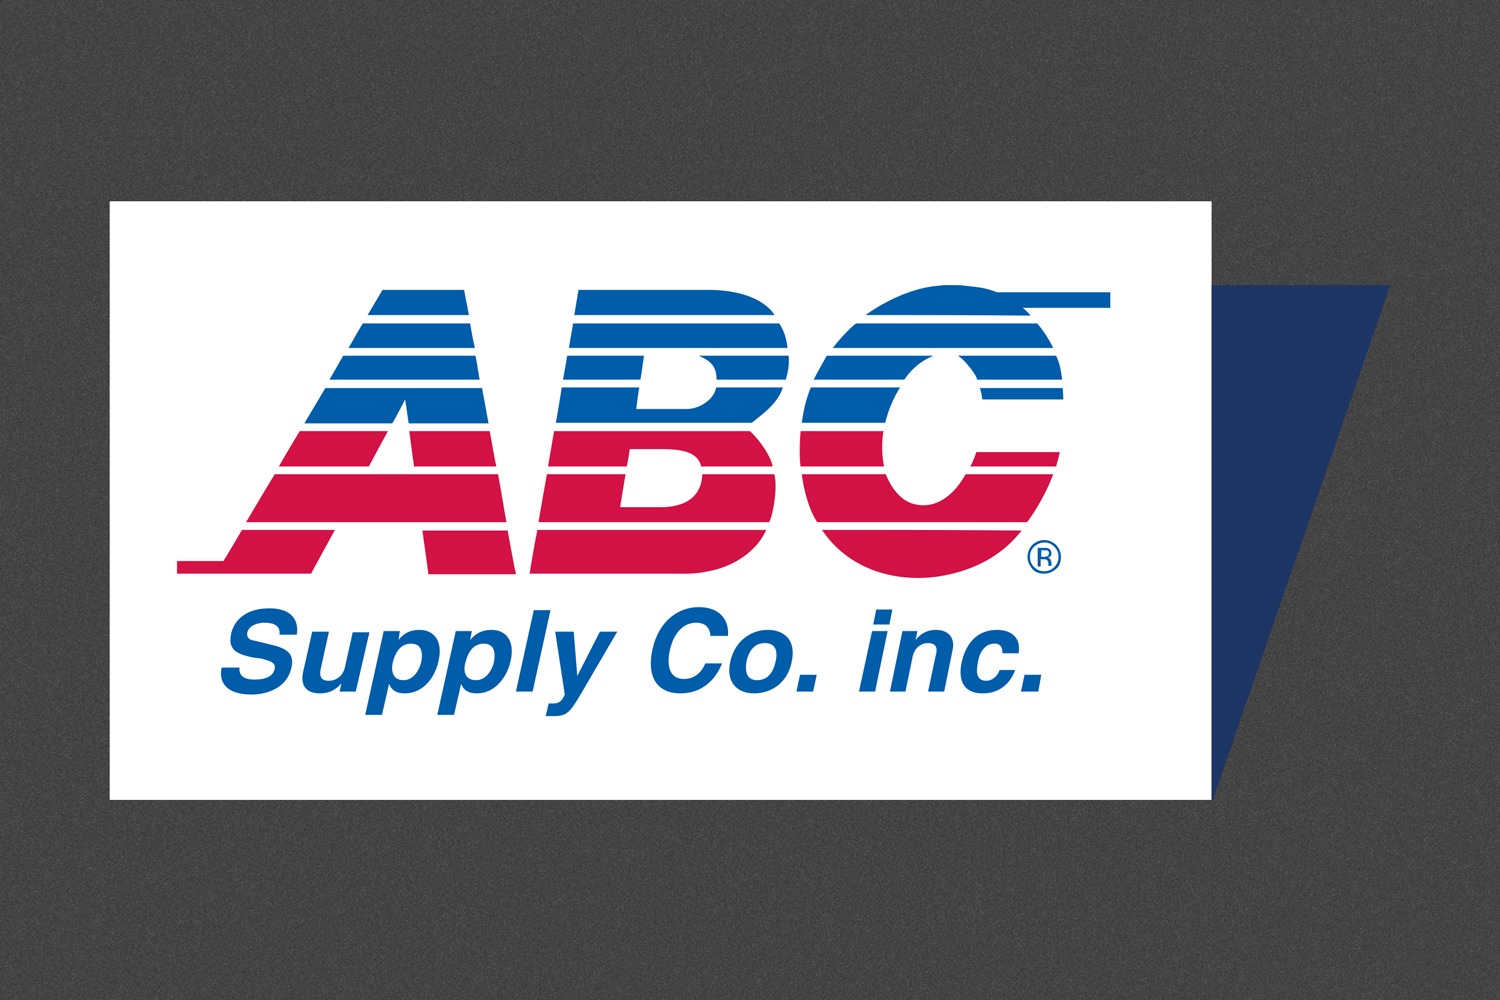 Read our comprehensive review of ABC Roofing Supply, a trusted provider of roofing materials and supplies. Discover their commitment to quality products, extensive inventory, and exceptional customer service. Partner with Gott Marketing for all your marketing needs in the construction industry.